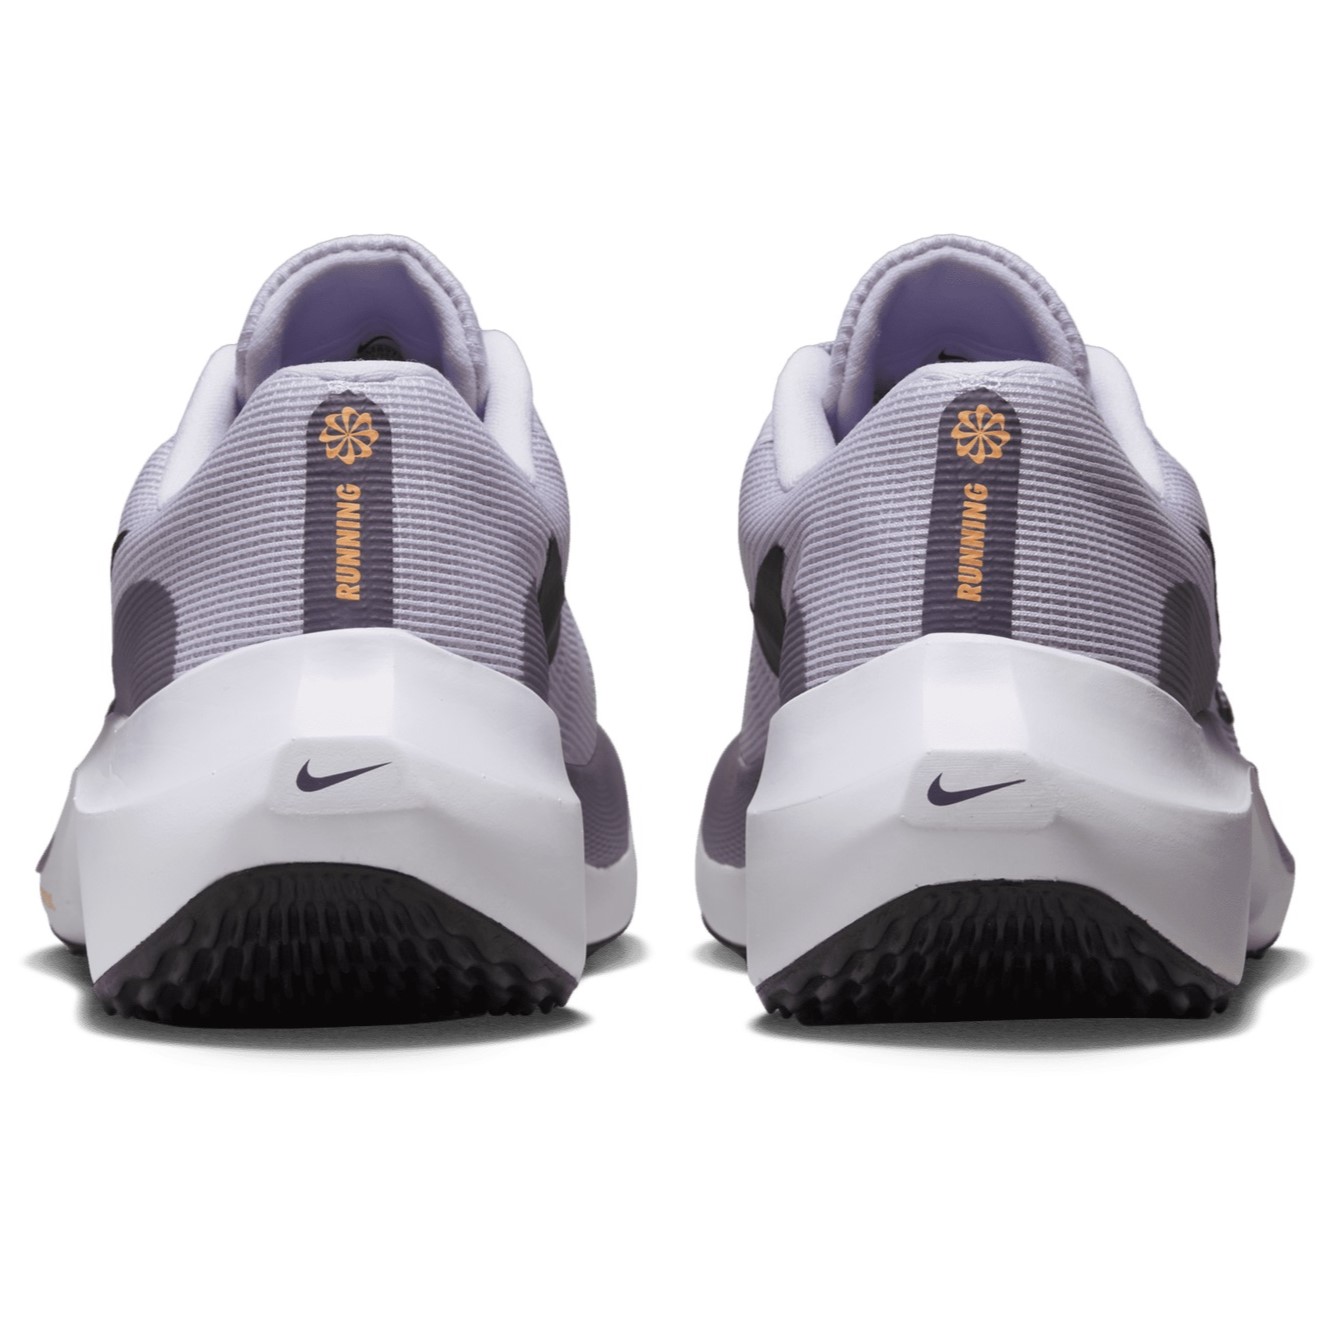 GIÀY THỂ THAO NIKE NỮ ZOOM FLY 5 WOMEN ROAD RUNNING SHOES BARELY GRAPE DM8974-500 7